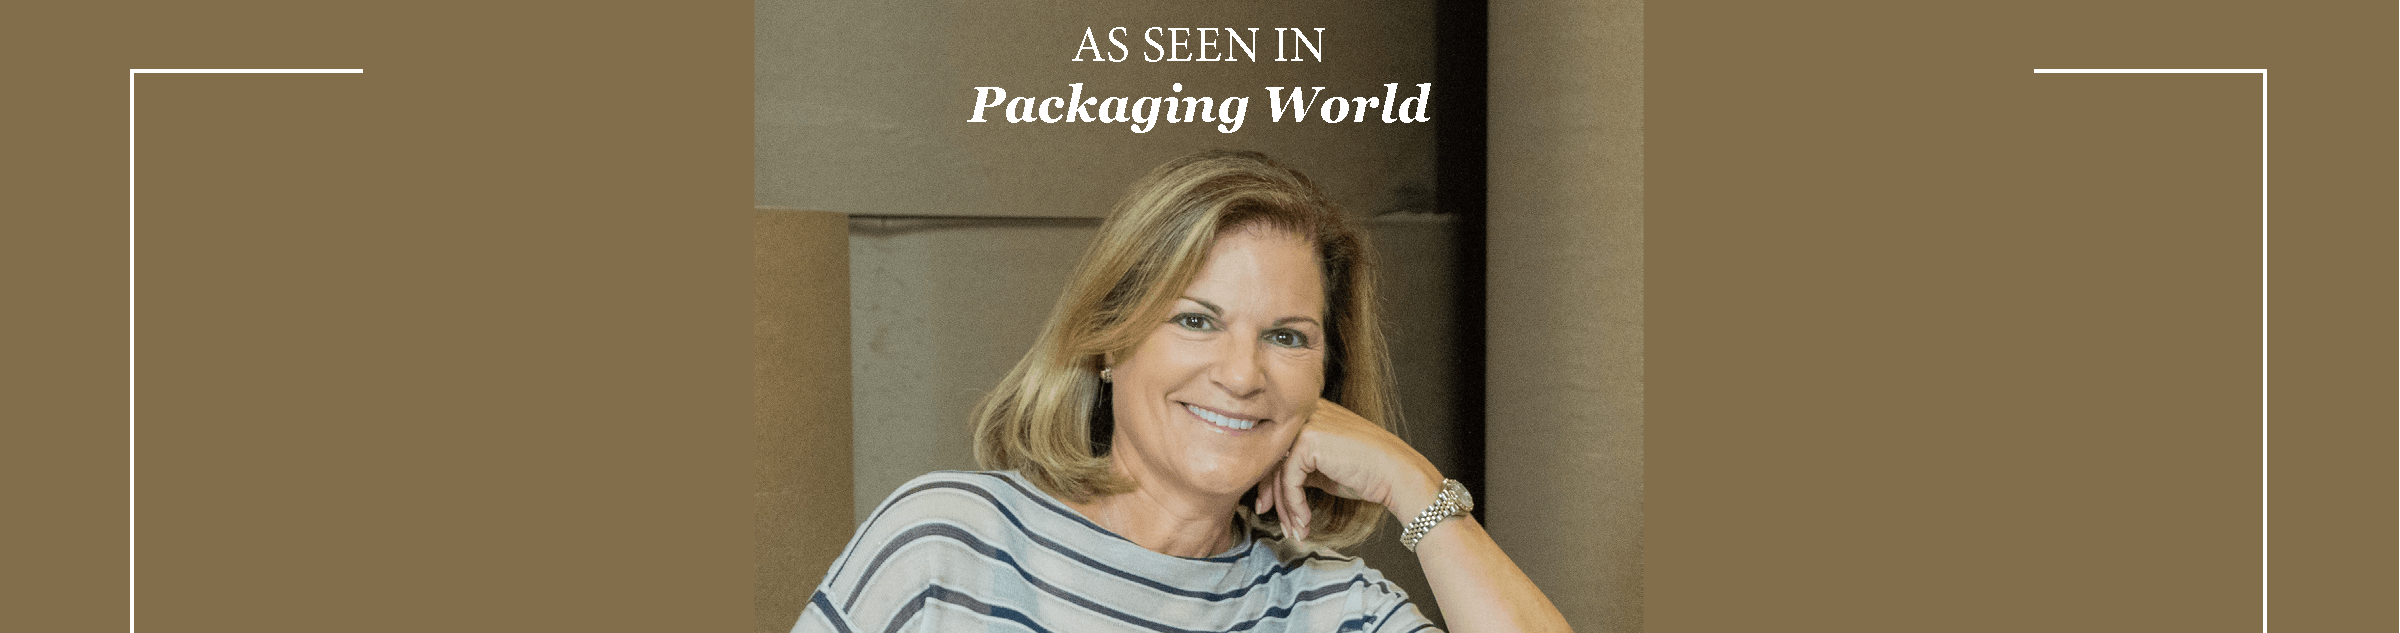 Packaging World Feature: Empowering Women in the Packaging Industry